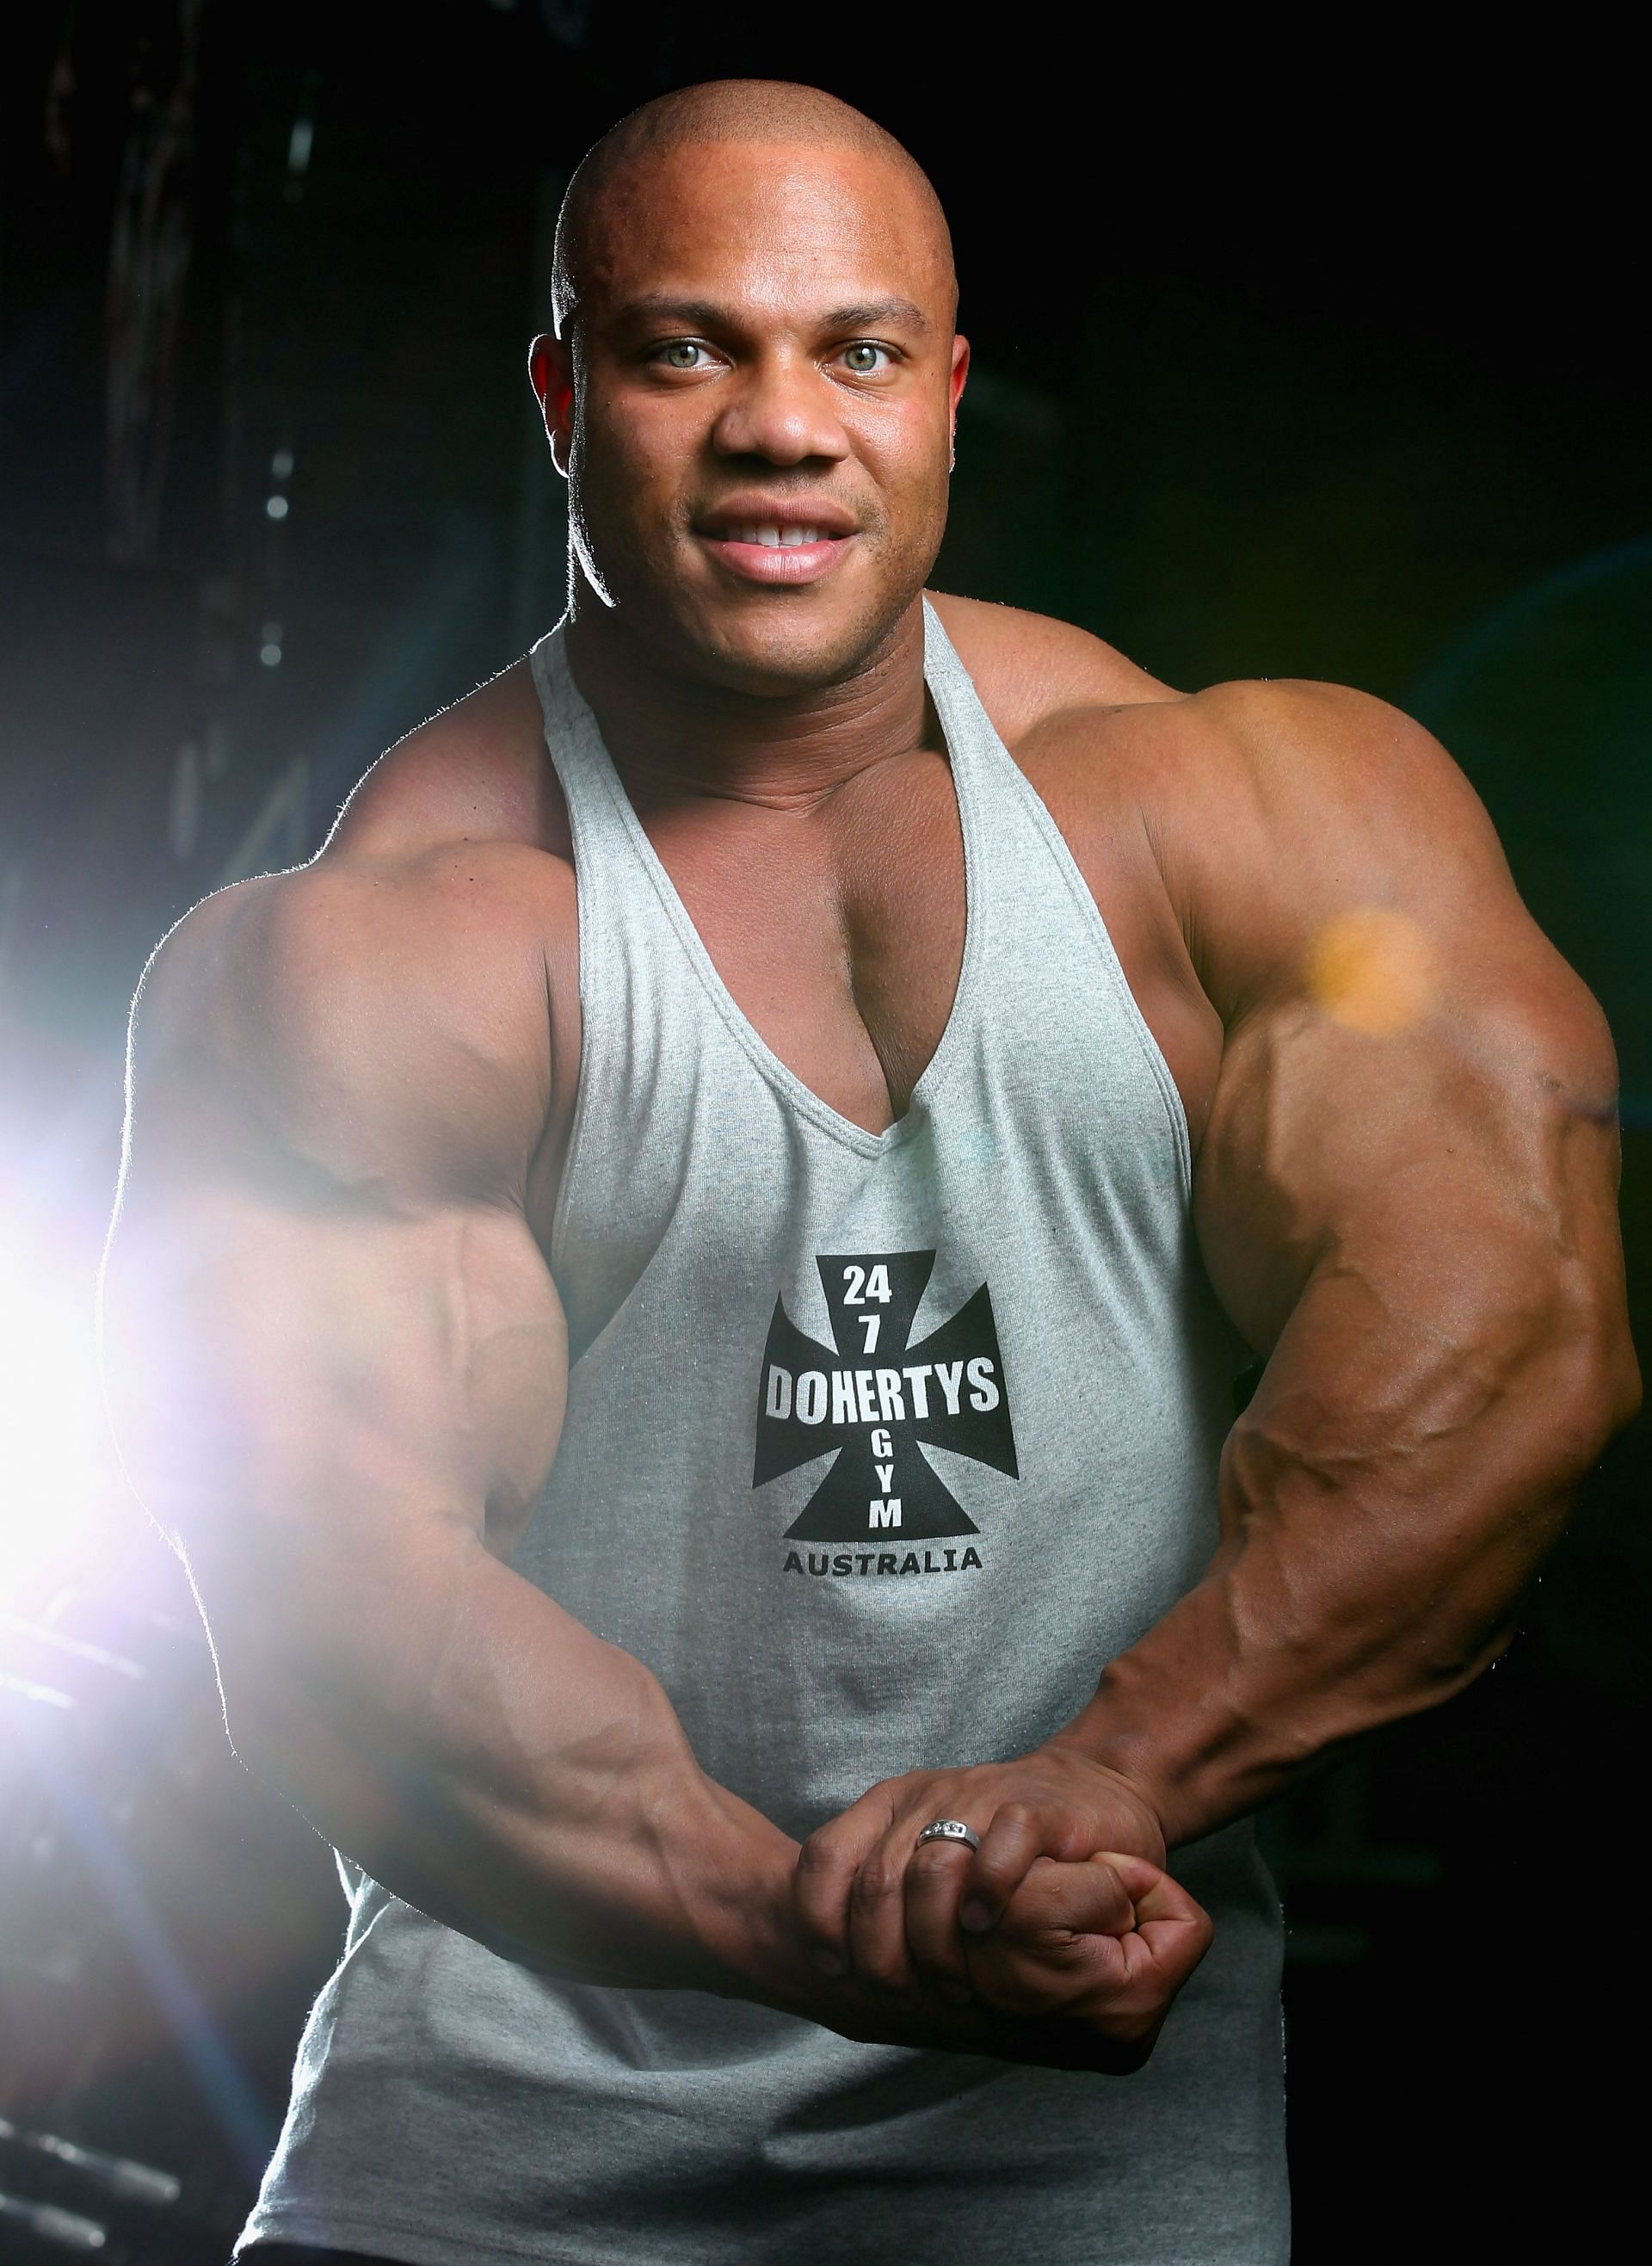 Mr Olympia Phil Heath poses during a media call ahead of the 2012 IFBB Australian Pro Grand Prix XIII (Photo by Robert Cianflone/Getty Images)